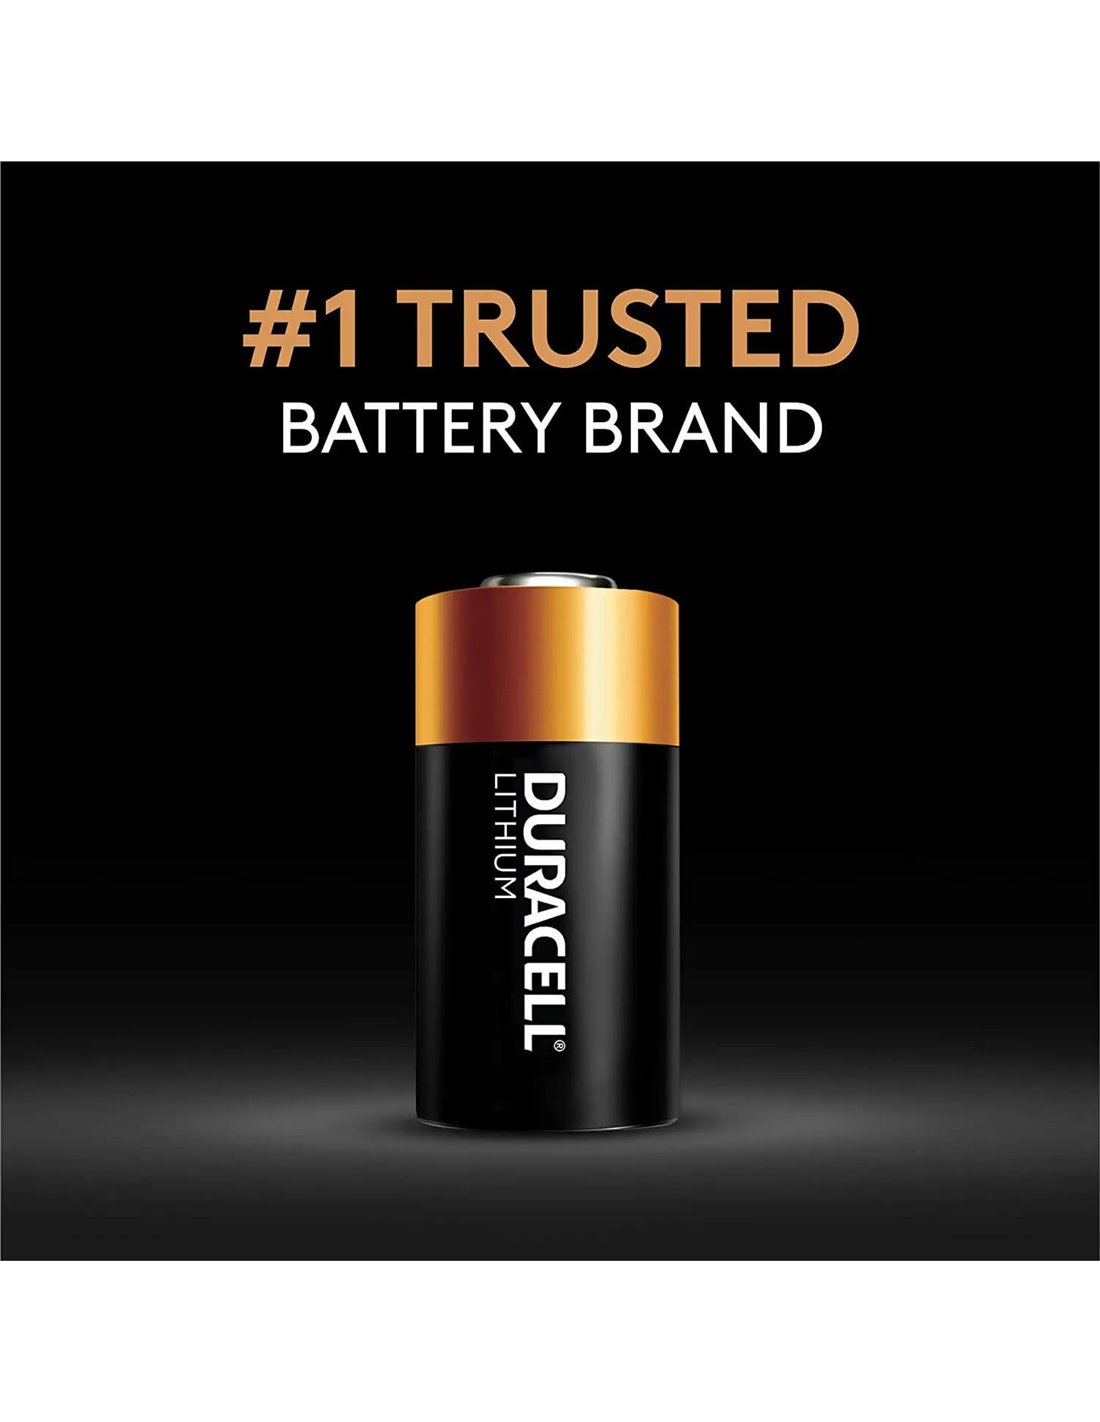 historie serie Foran dig Duracell 3V DL123A 1400Mah Lithium Battery replaces CR123, CR123A - Non  Rechargeable